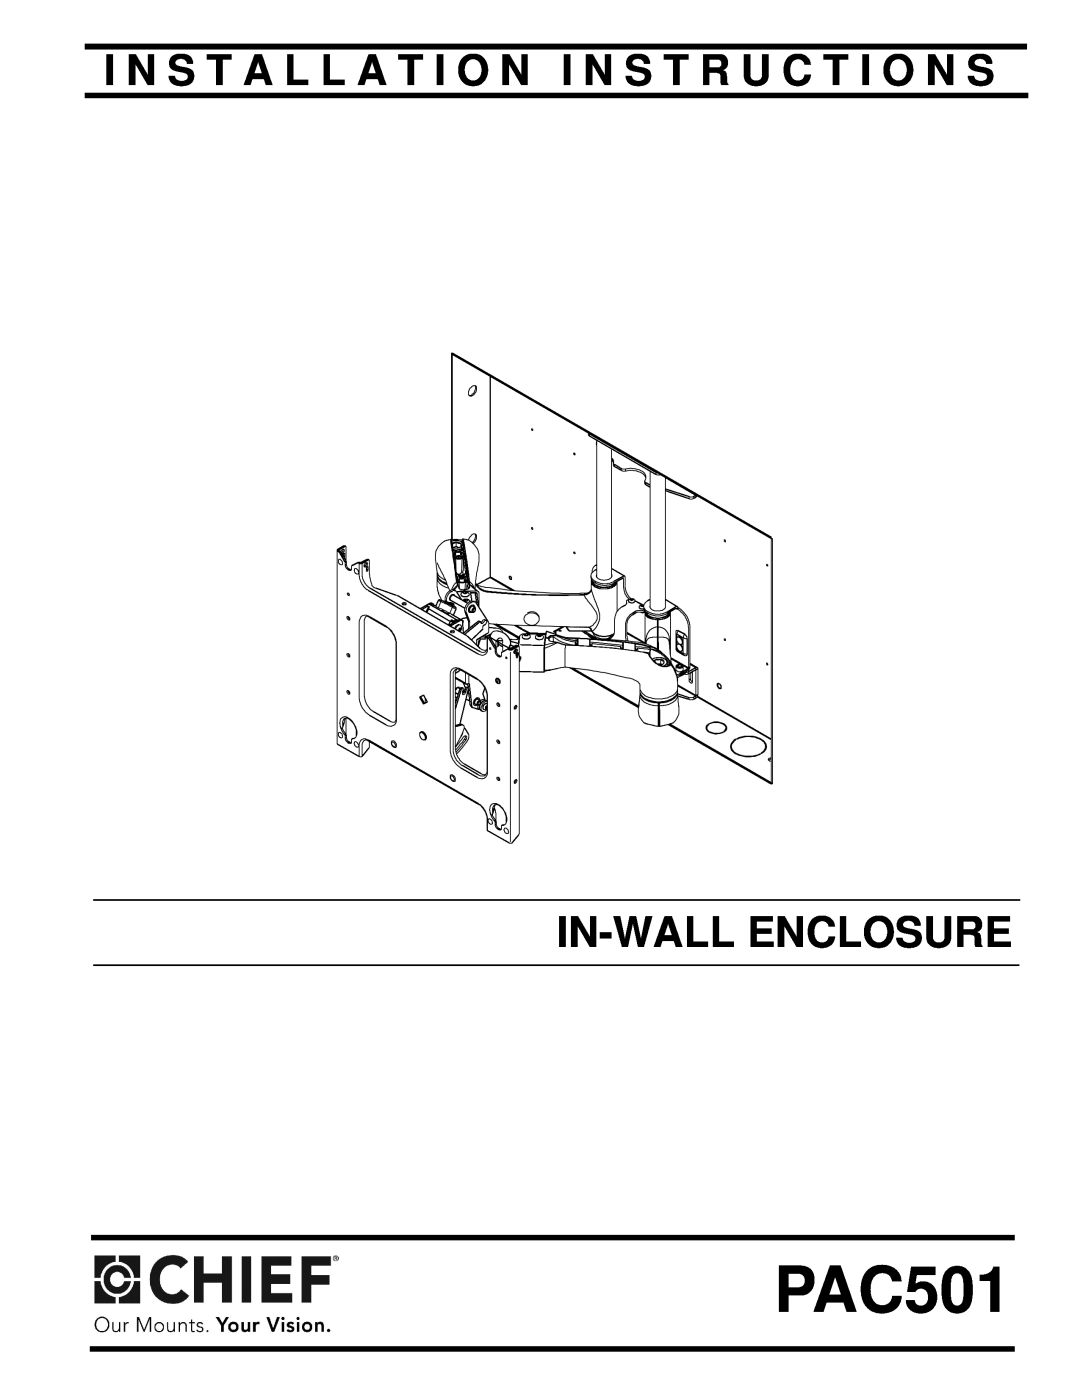 Chief Manufacturing PAC501 installation instructions I N S T A L L A T I O N I N S T R U C T I O N S, In-Wallenclosure 